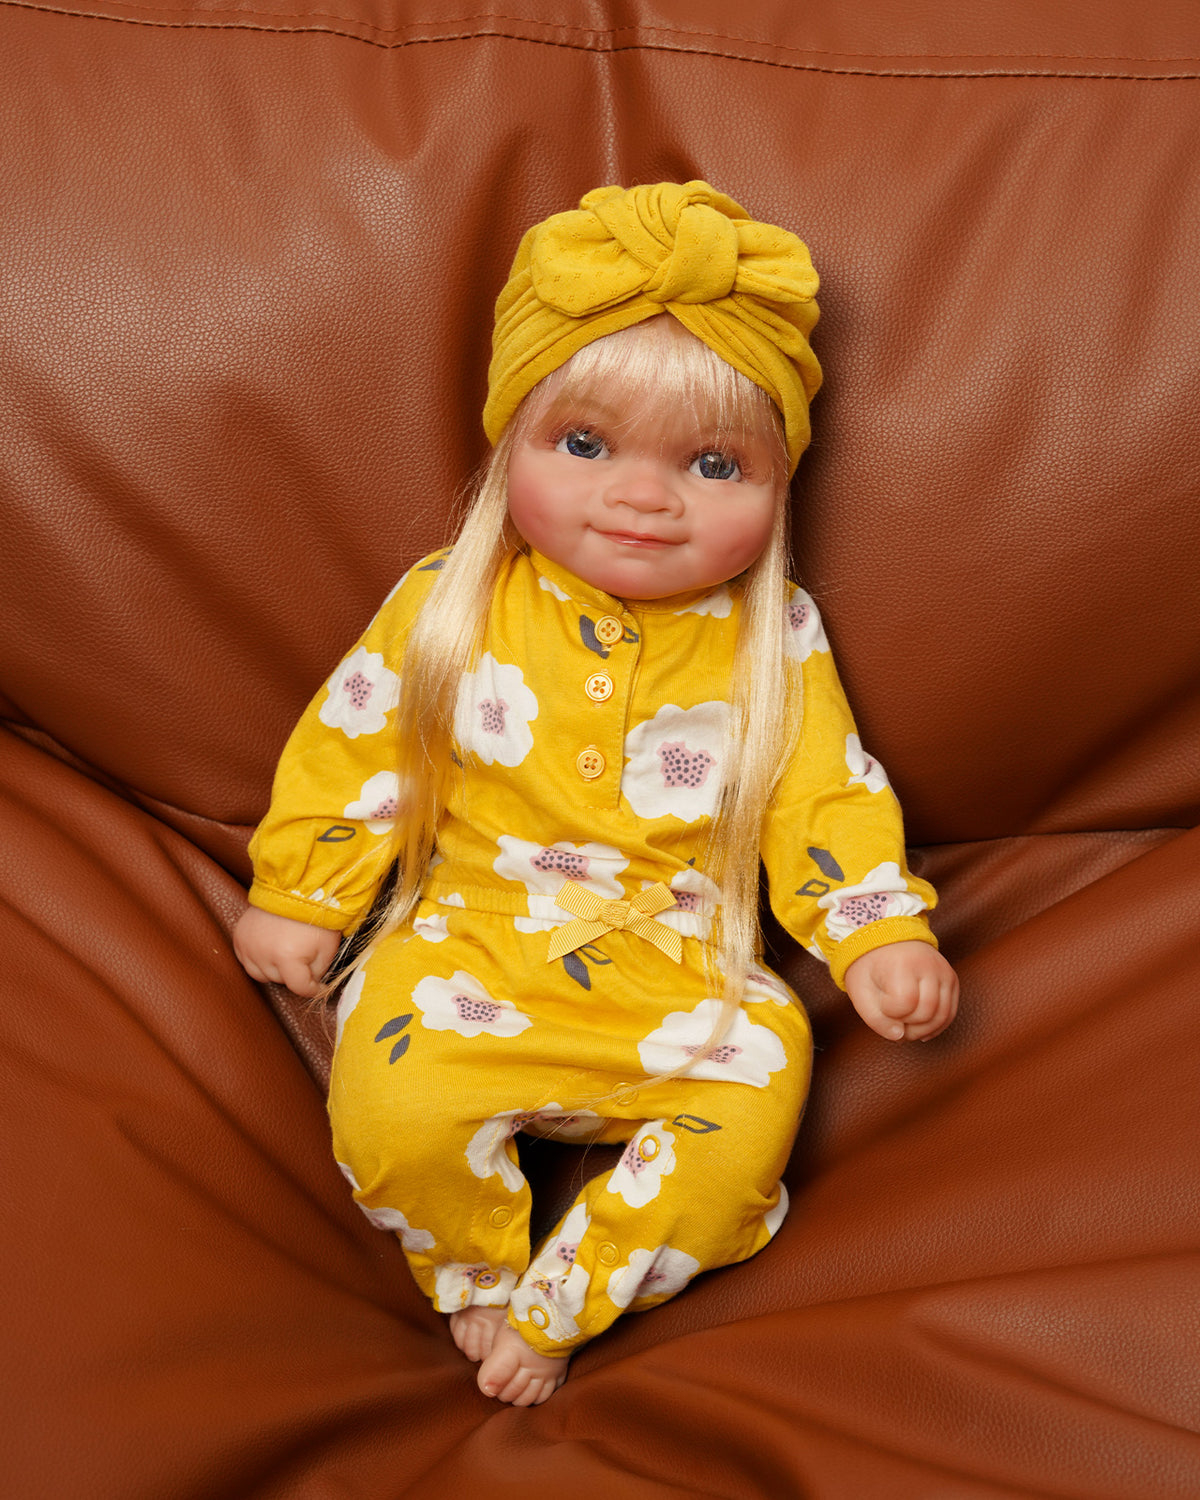 Dolly - 20" Reborn Baby Dolls Cute Smile Newborn Girl with Real-Looking Skin Handmade Real Life Baby Dolls Birthday Gift, Holiday Gift